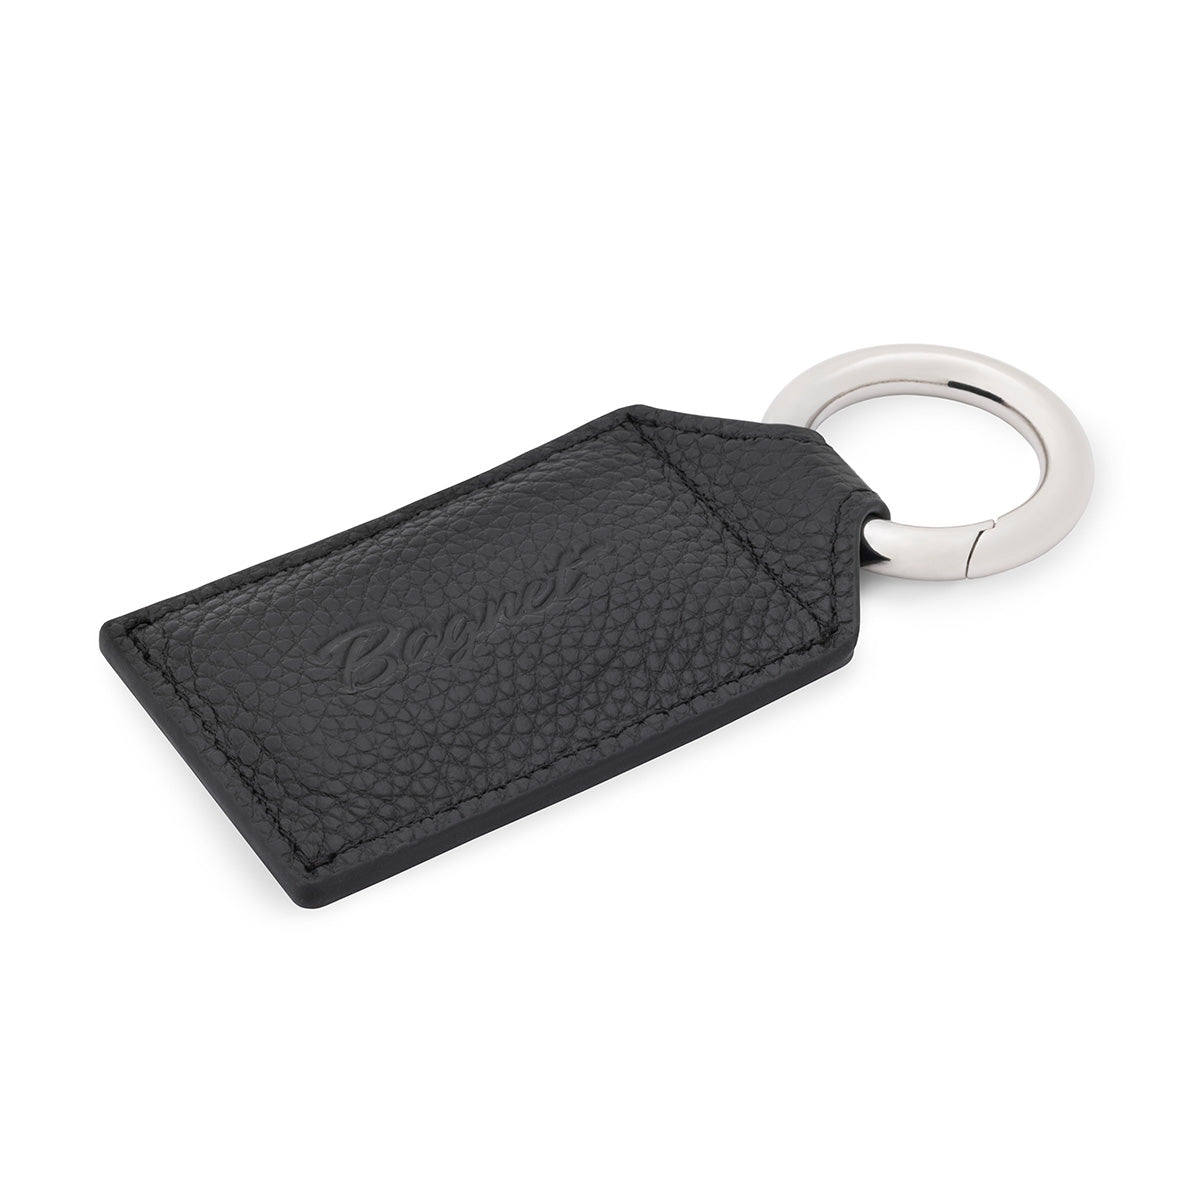 Polished Nickel Luggage ID Tag with Black Leather Strap